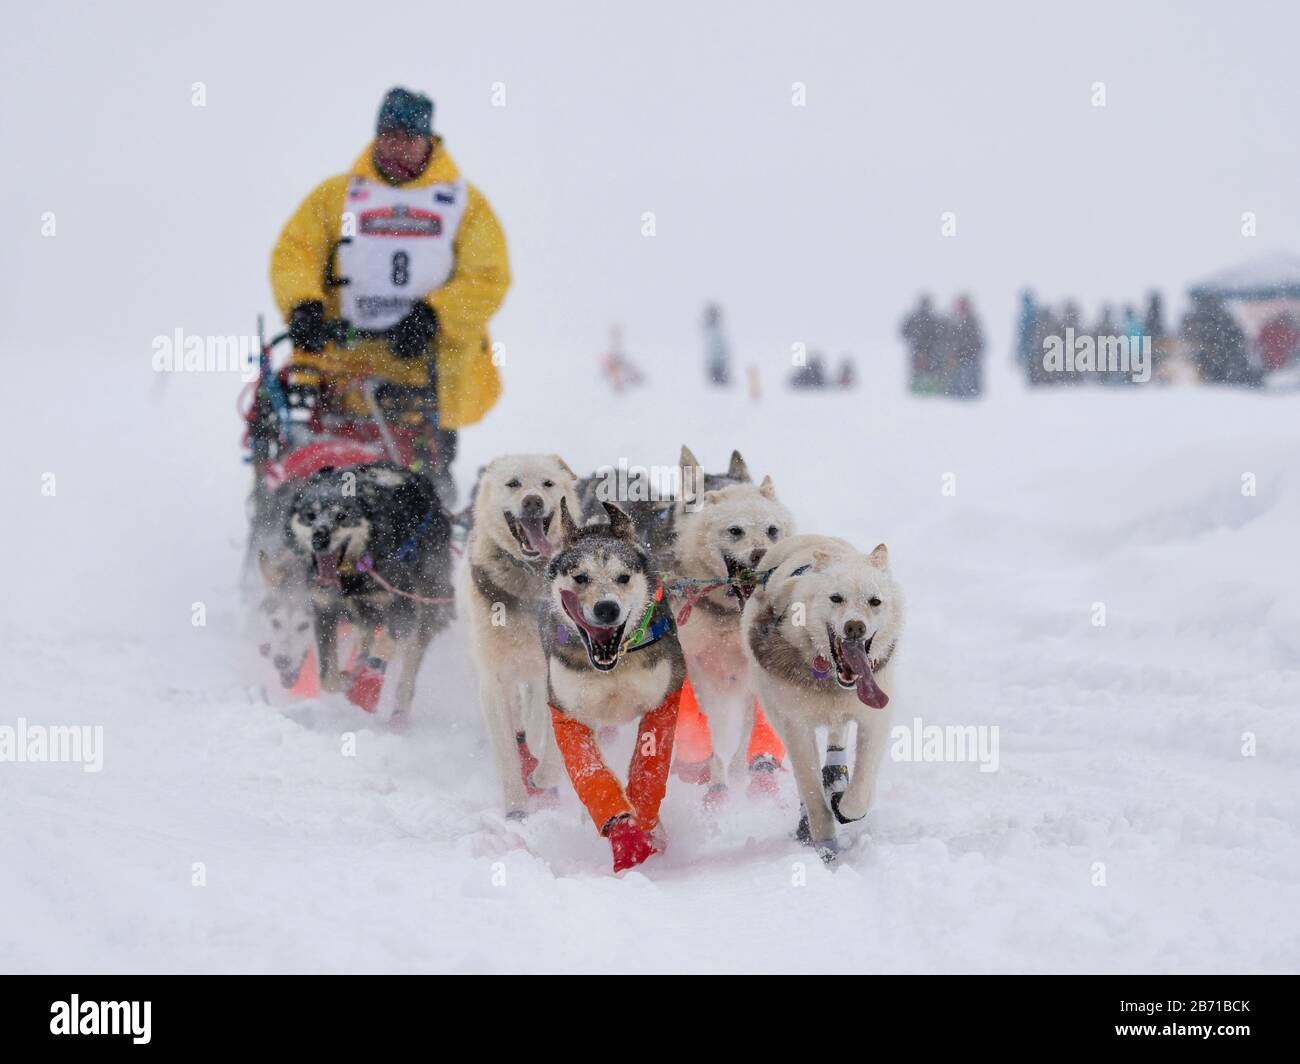 Musher Linwood Fiedler competing in the 48th Iditarod Trail Sled Dog Race in Southcentral Alaska. Stock Photo